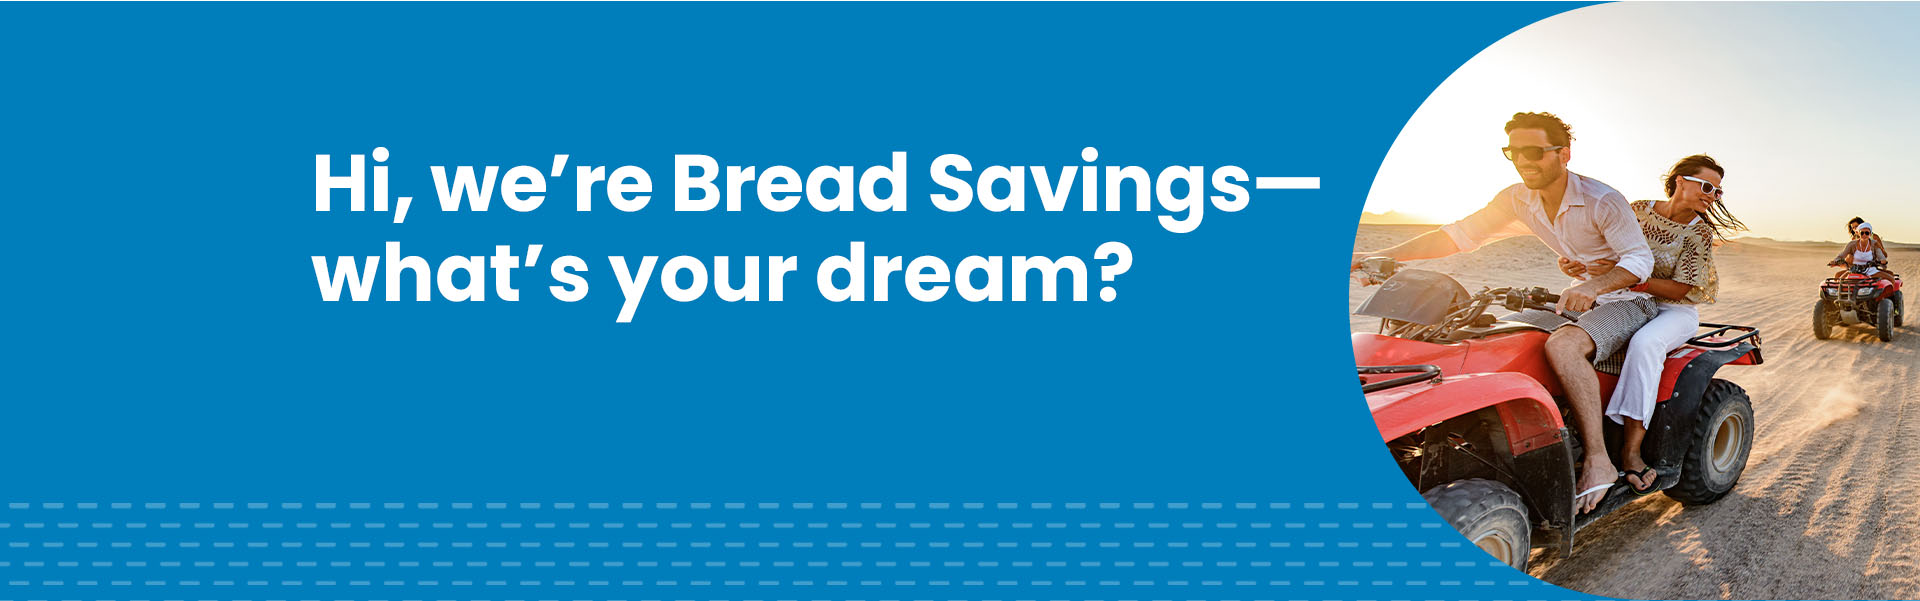 Hi, we're Bread Savings-what's your dream?